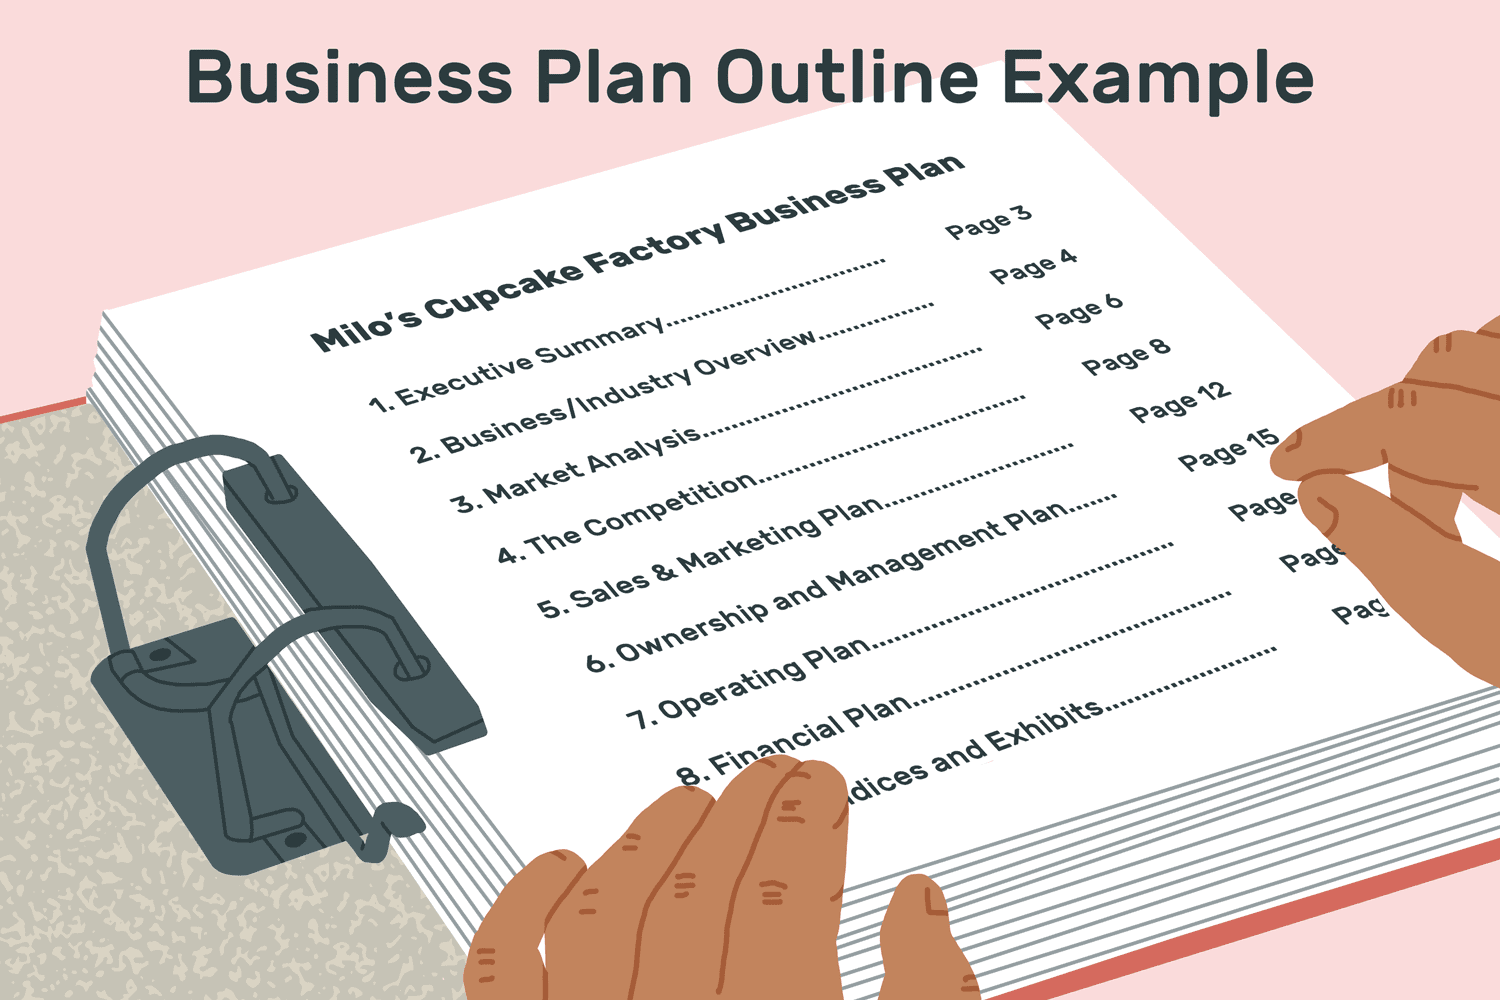 Business plan outline example: milo's cupcake factor business plan. Opens to a book index page, sections including: Executive summary, business/industry overview, market analysis, the competition, sales and marketing plan, ownership and management plan. operating plan, financial plan (unknown) and exhibits.